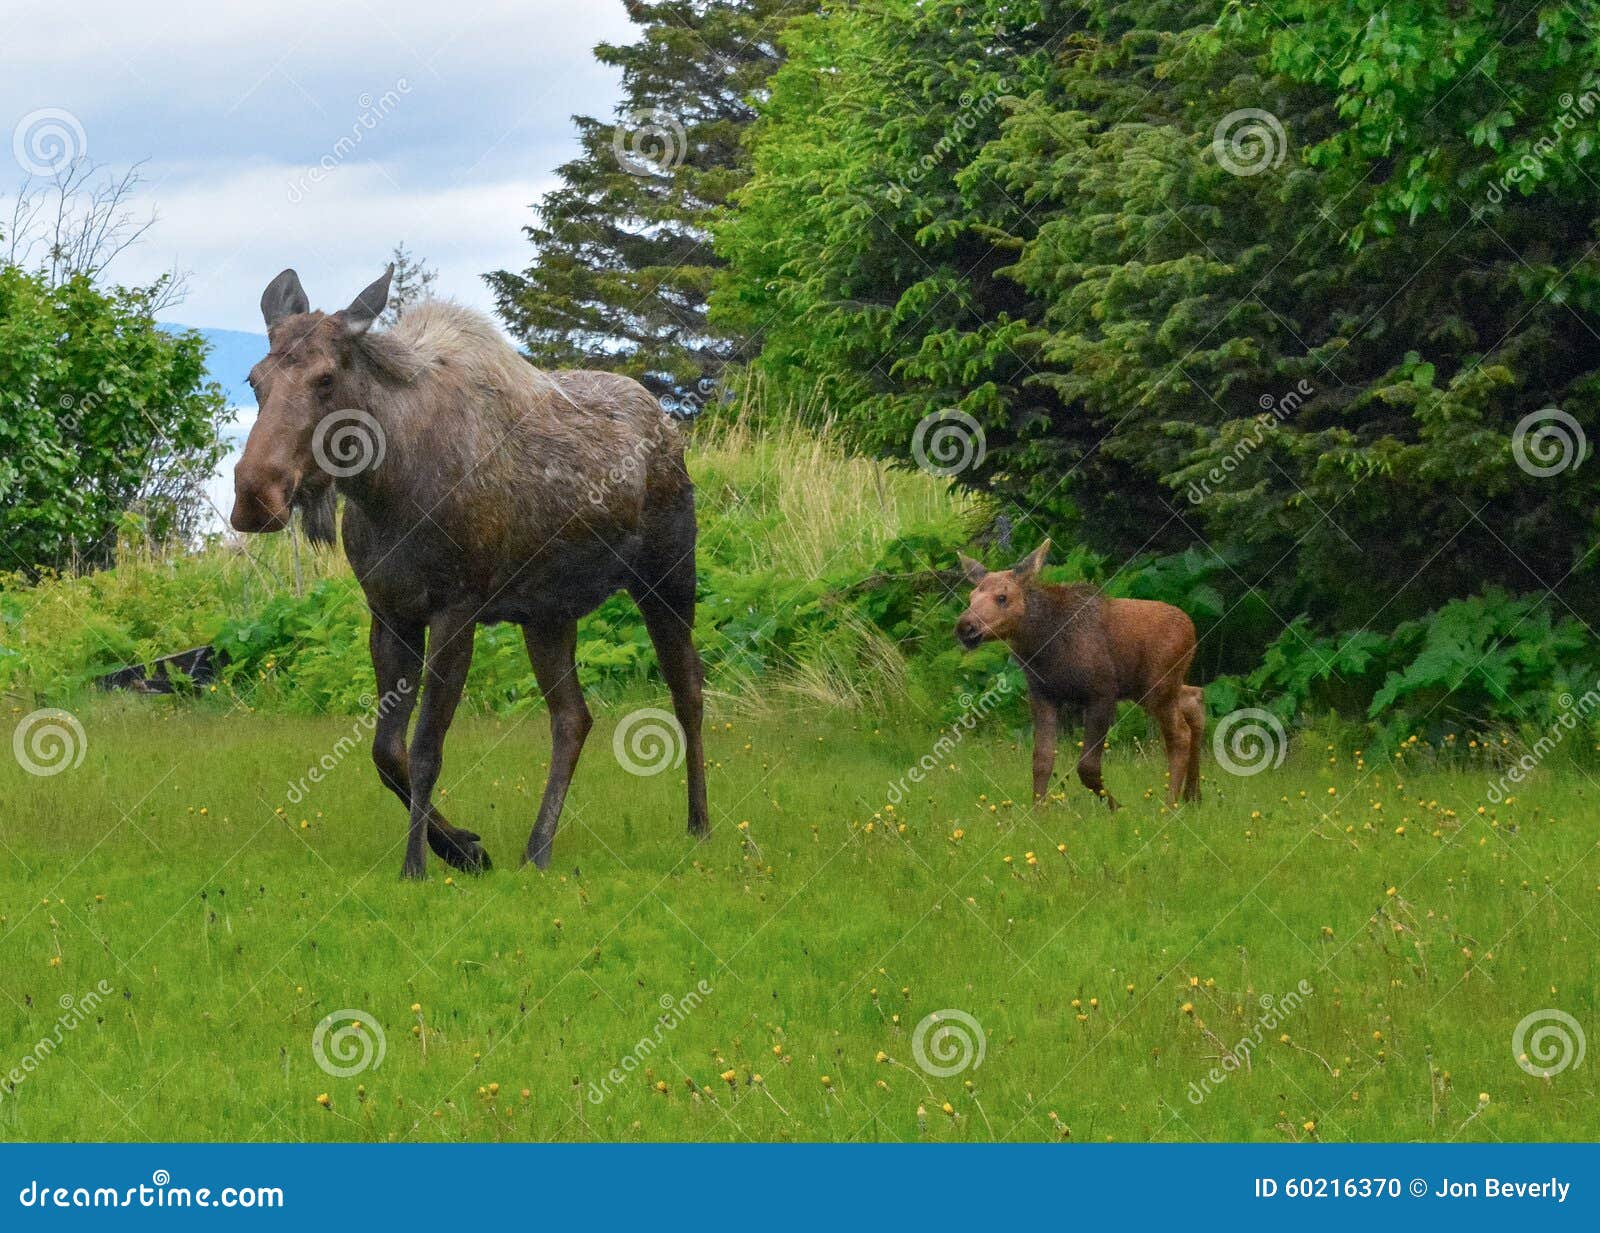 Moose Cow And Calf Emerge From Trees Stock Photo Image Of Wilderness